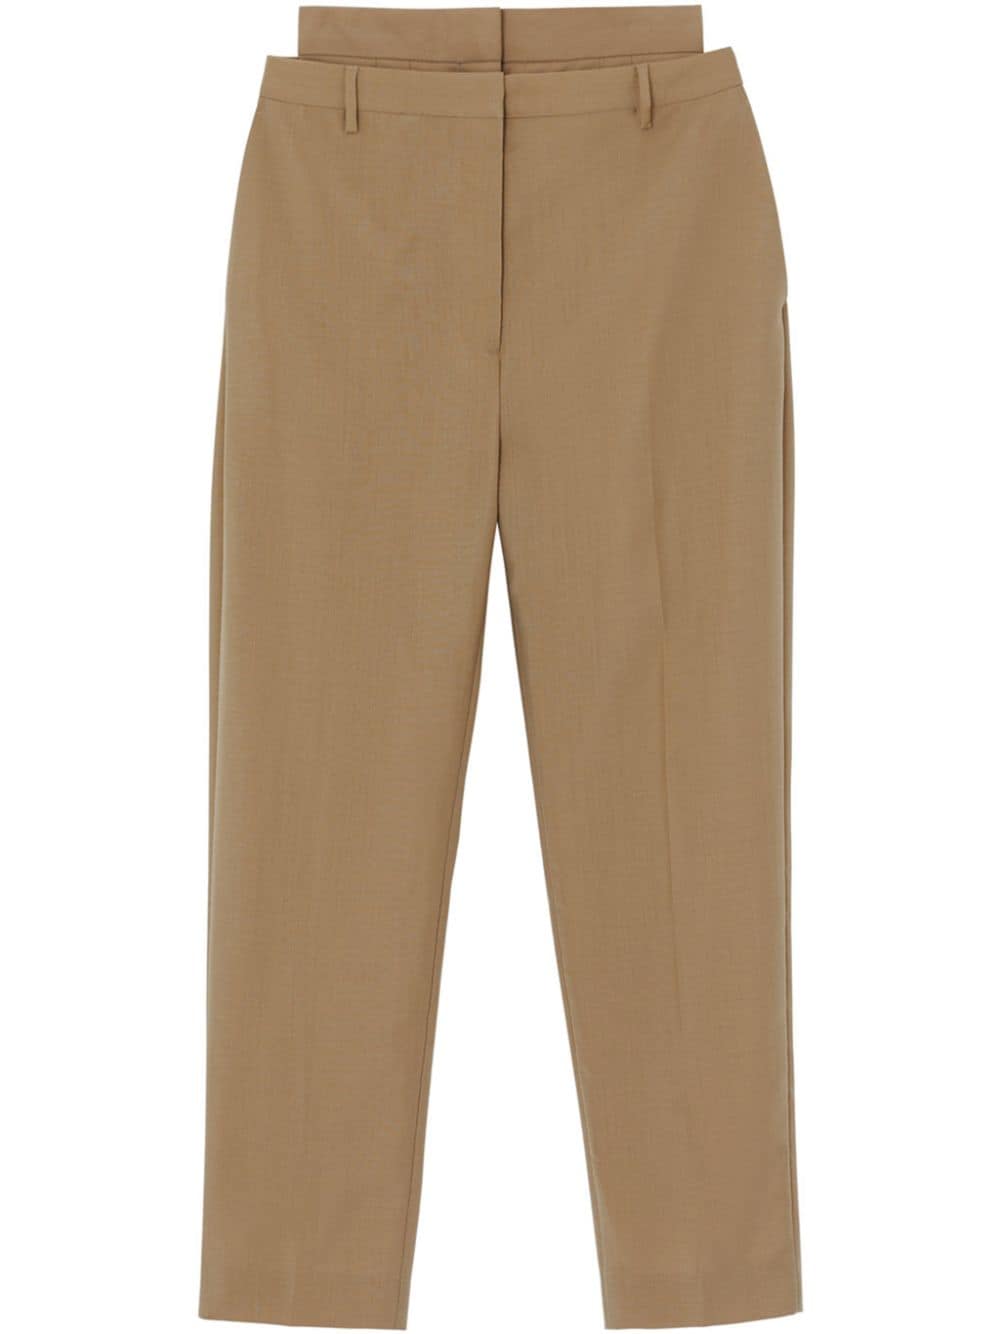 Burberry Double-waist Mohair Wool Trousers - Brown von Burberry